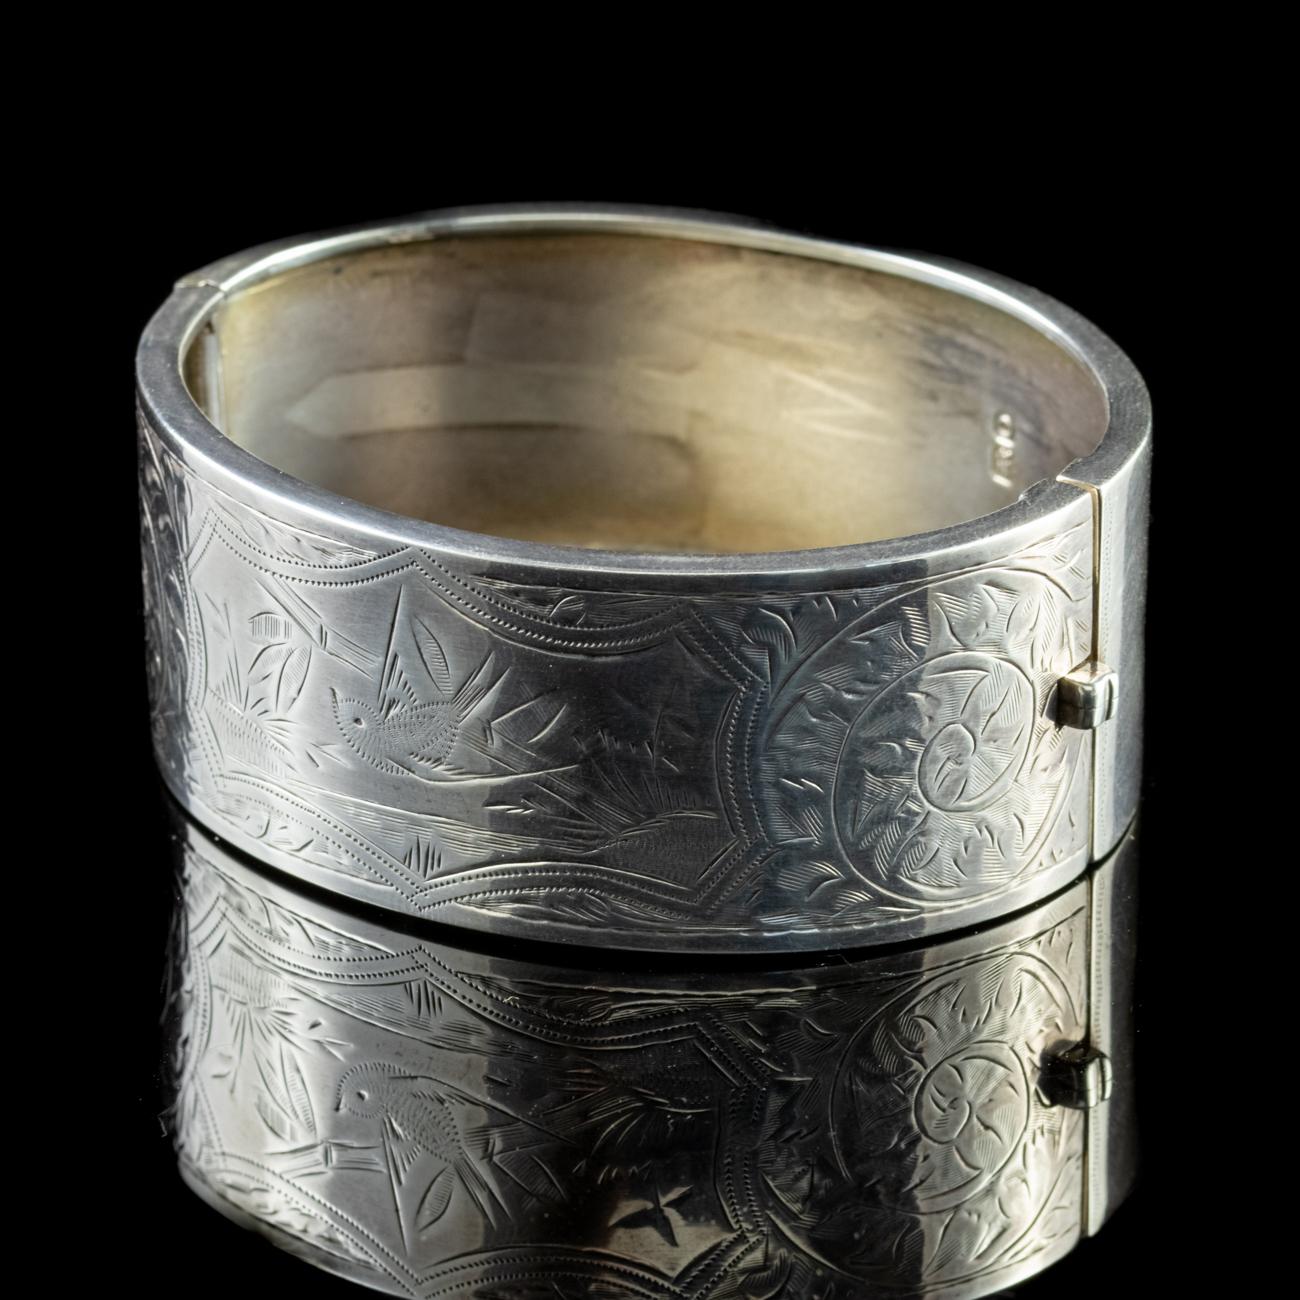 This striking Sterling Silver Edwardian bird bangle has been intricately engraved across the face with a pattern of natural forms surrounding a single swallow in flight.

Swallows are known to mate for life, and symbolise love and faithfulness. The